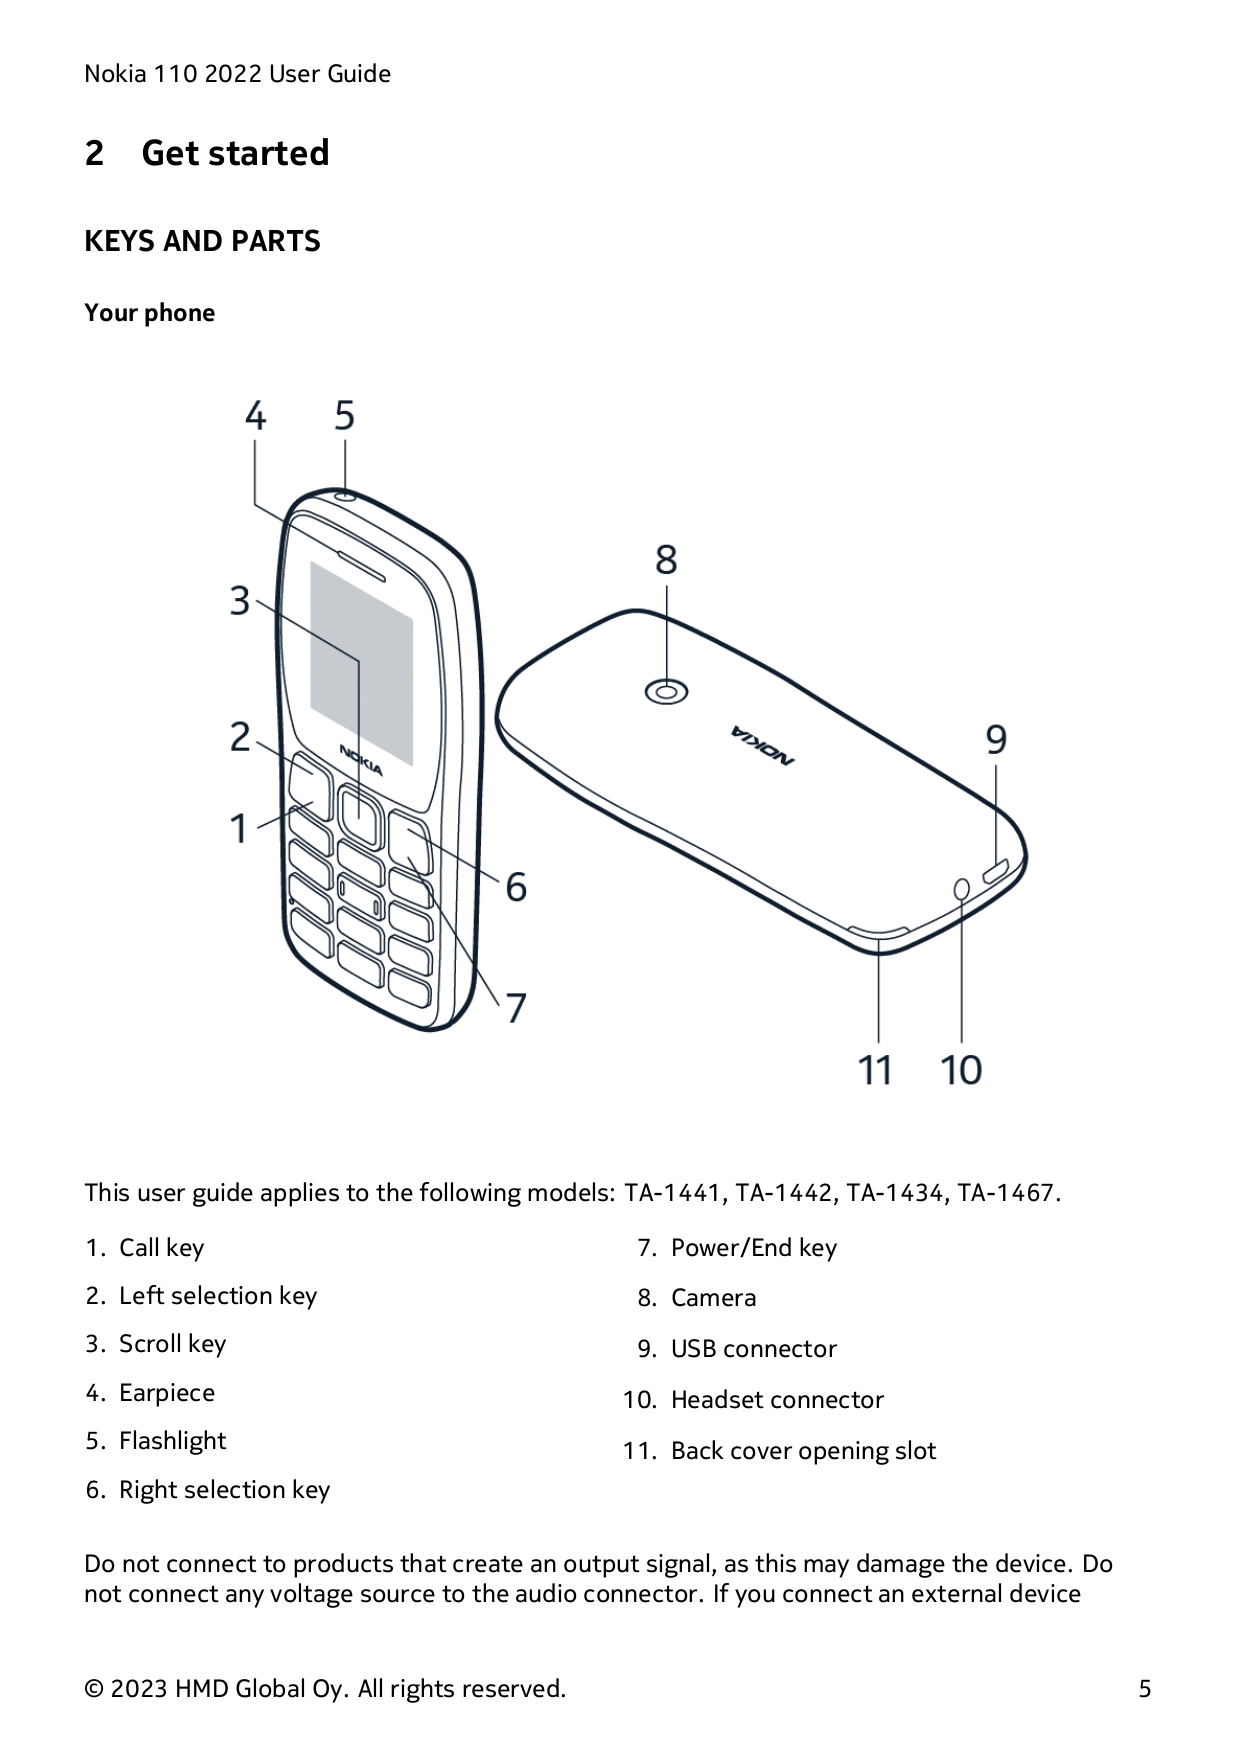 Nokia 110 2022 User Guide2Get startedKEYS AND PARTSYour phoneThis user guide applies to the following models: TA-1441, TA-1442, 